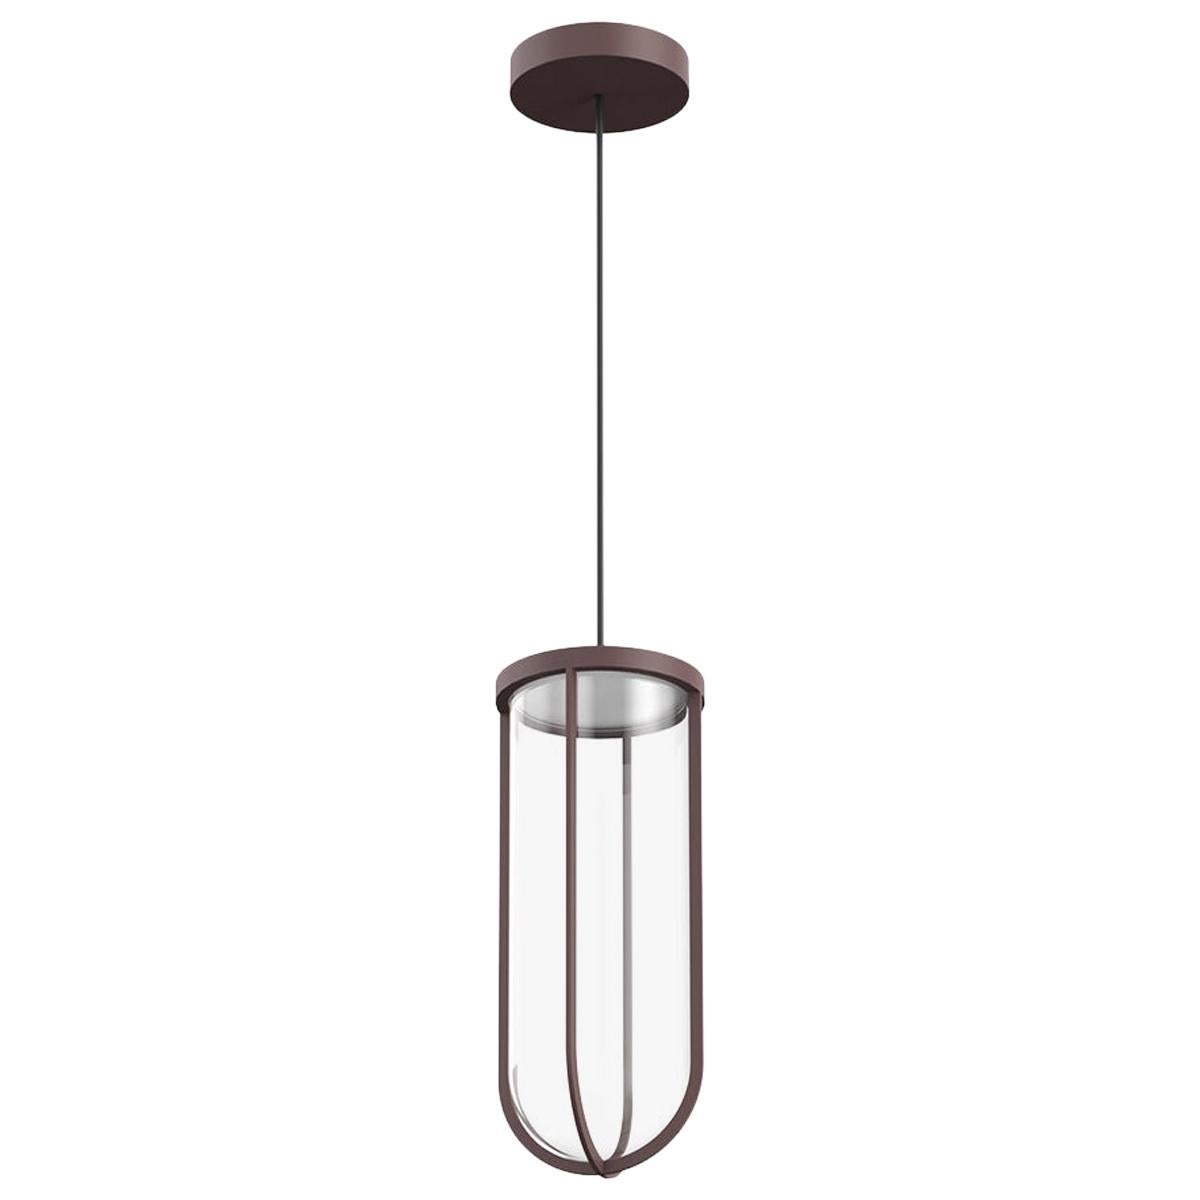 Flos In Vitro 3000K LED Suspension Lamp in Deep Brown by Philippe Starck For Sale